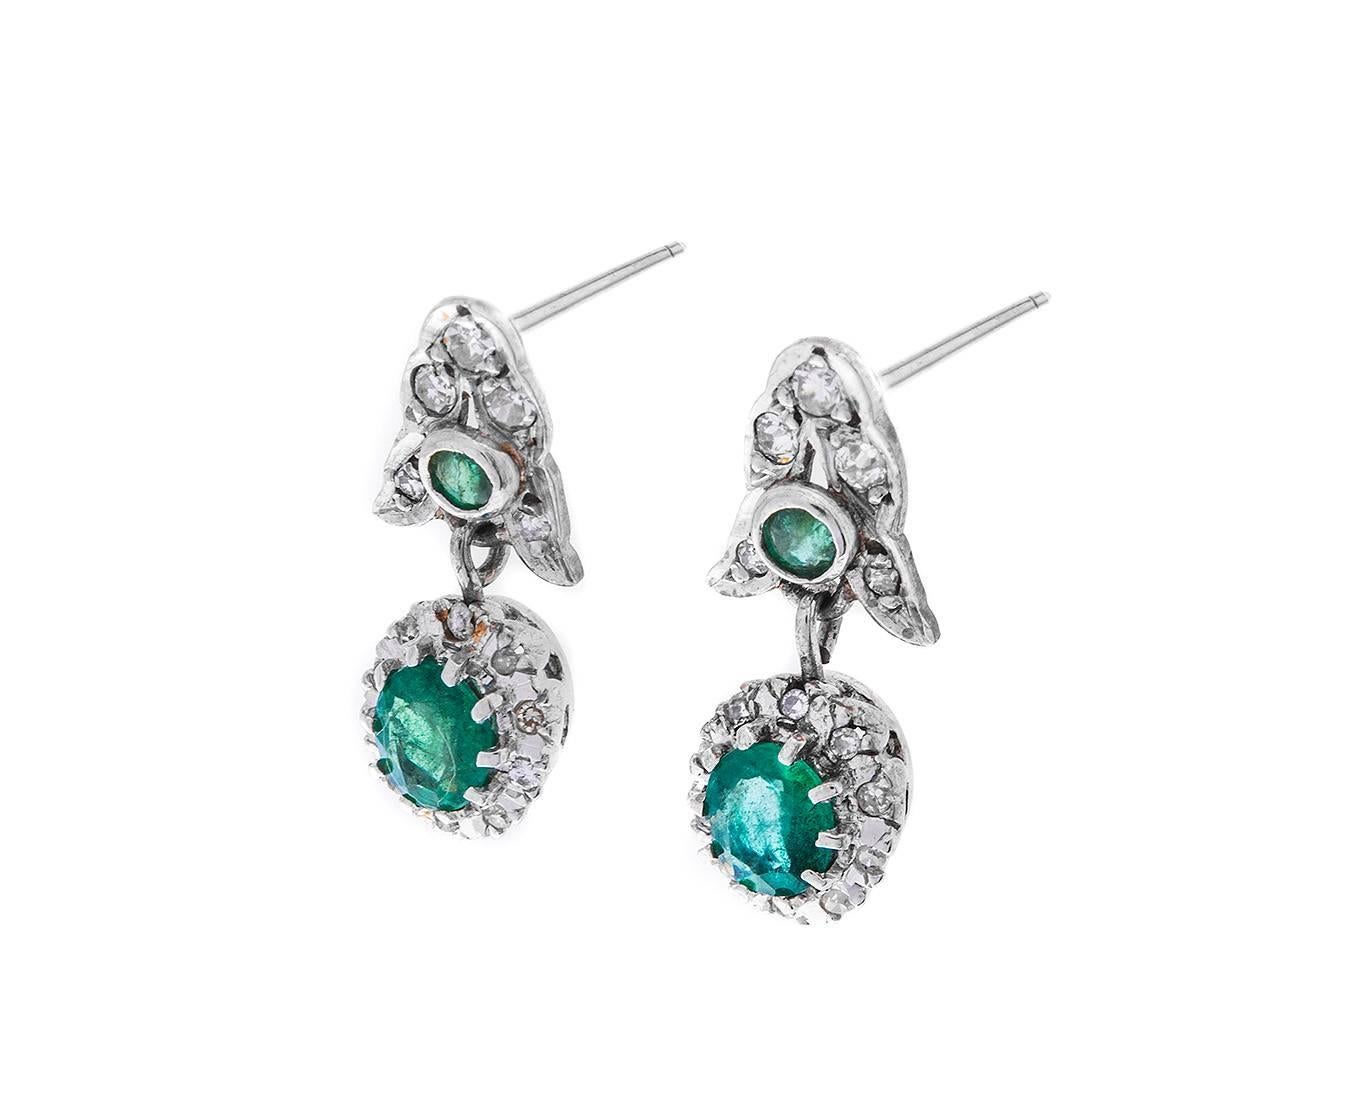 A wonderful pair of antique drop 9ct white gold earrings fashioned in white gold, embellished with diamonds and showcasing beautiful green emeralds. Each earring exhibits a delicious cluster of emerald and diamond suspended from floral motif also